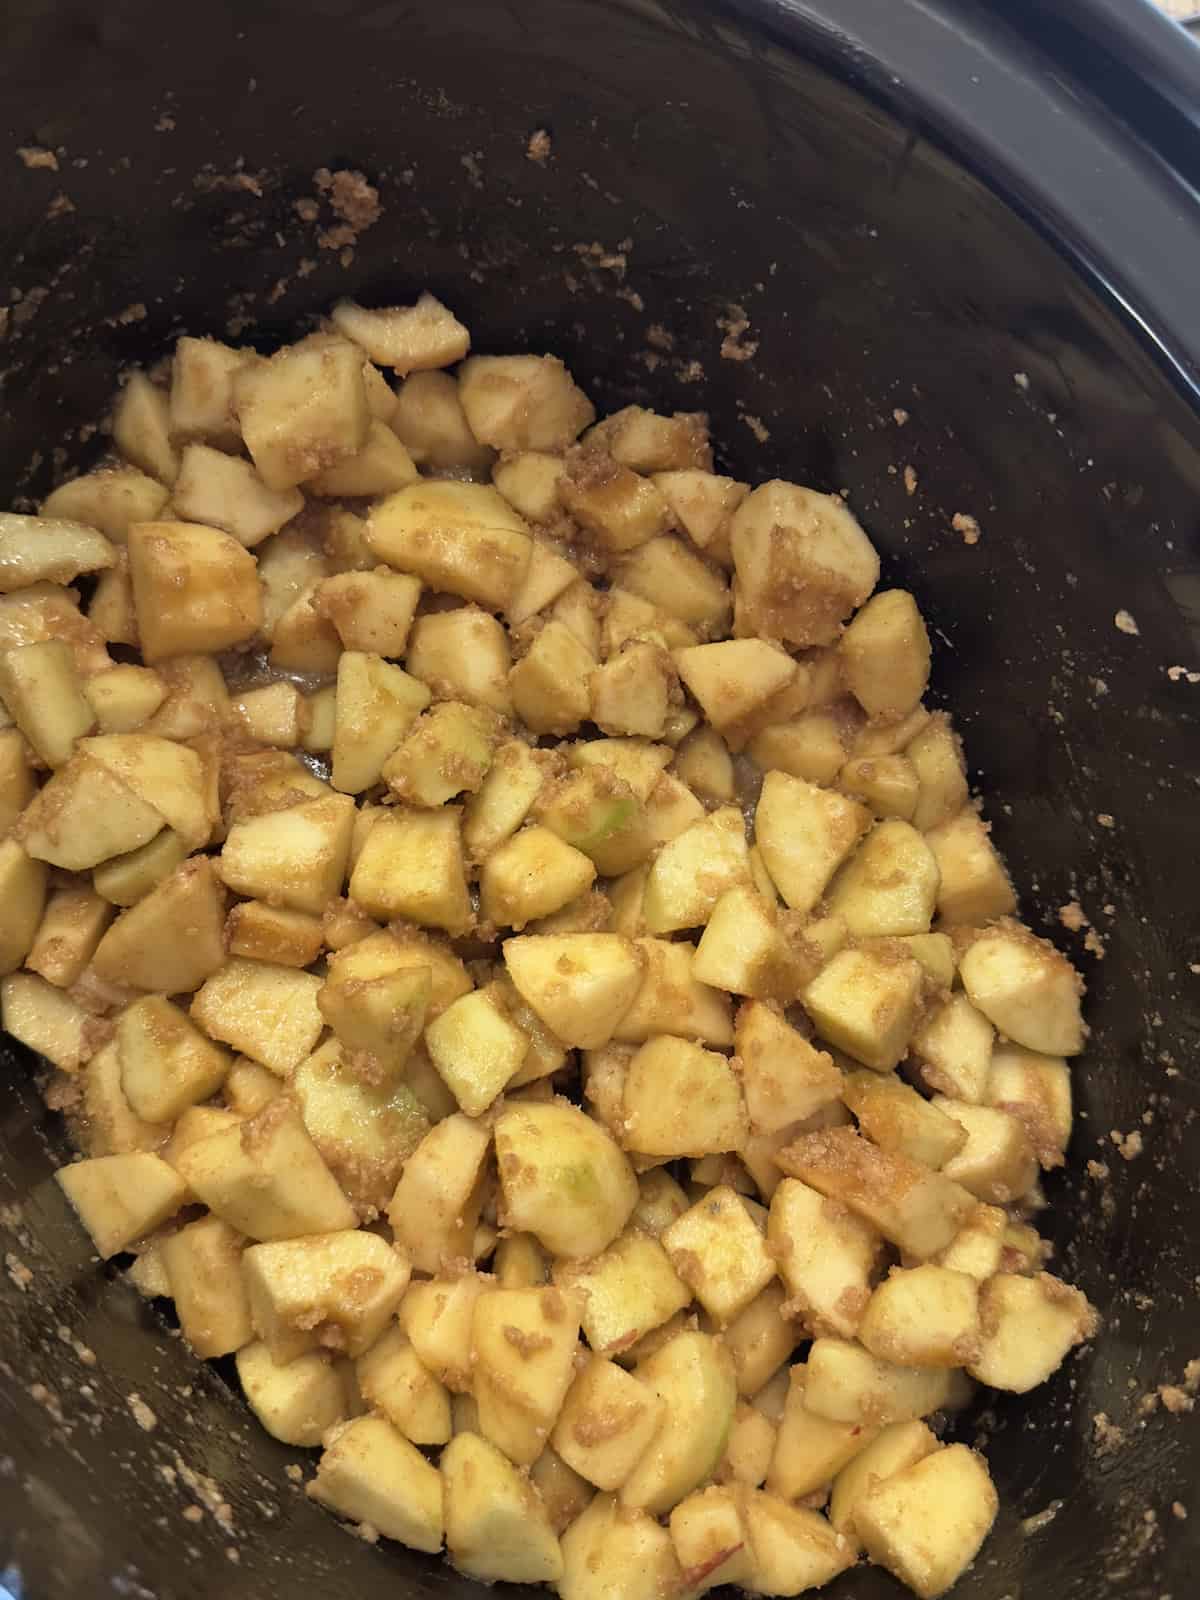 uncooked apple pie filling in a slow cooker